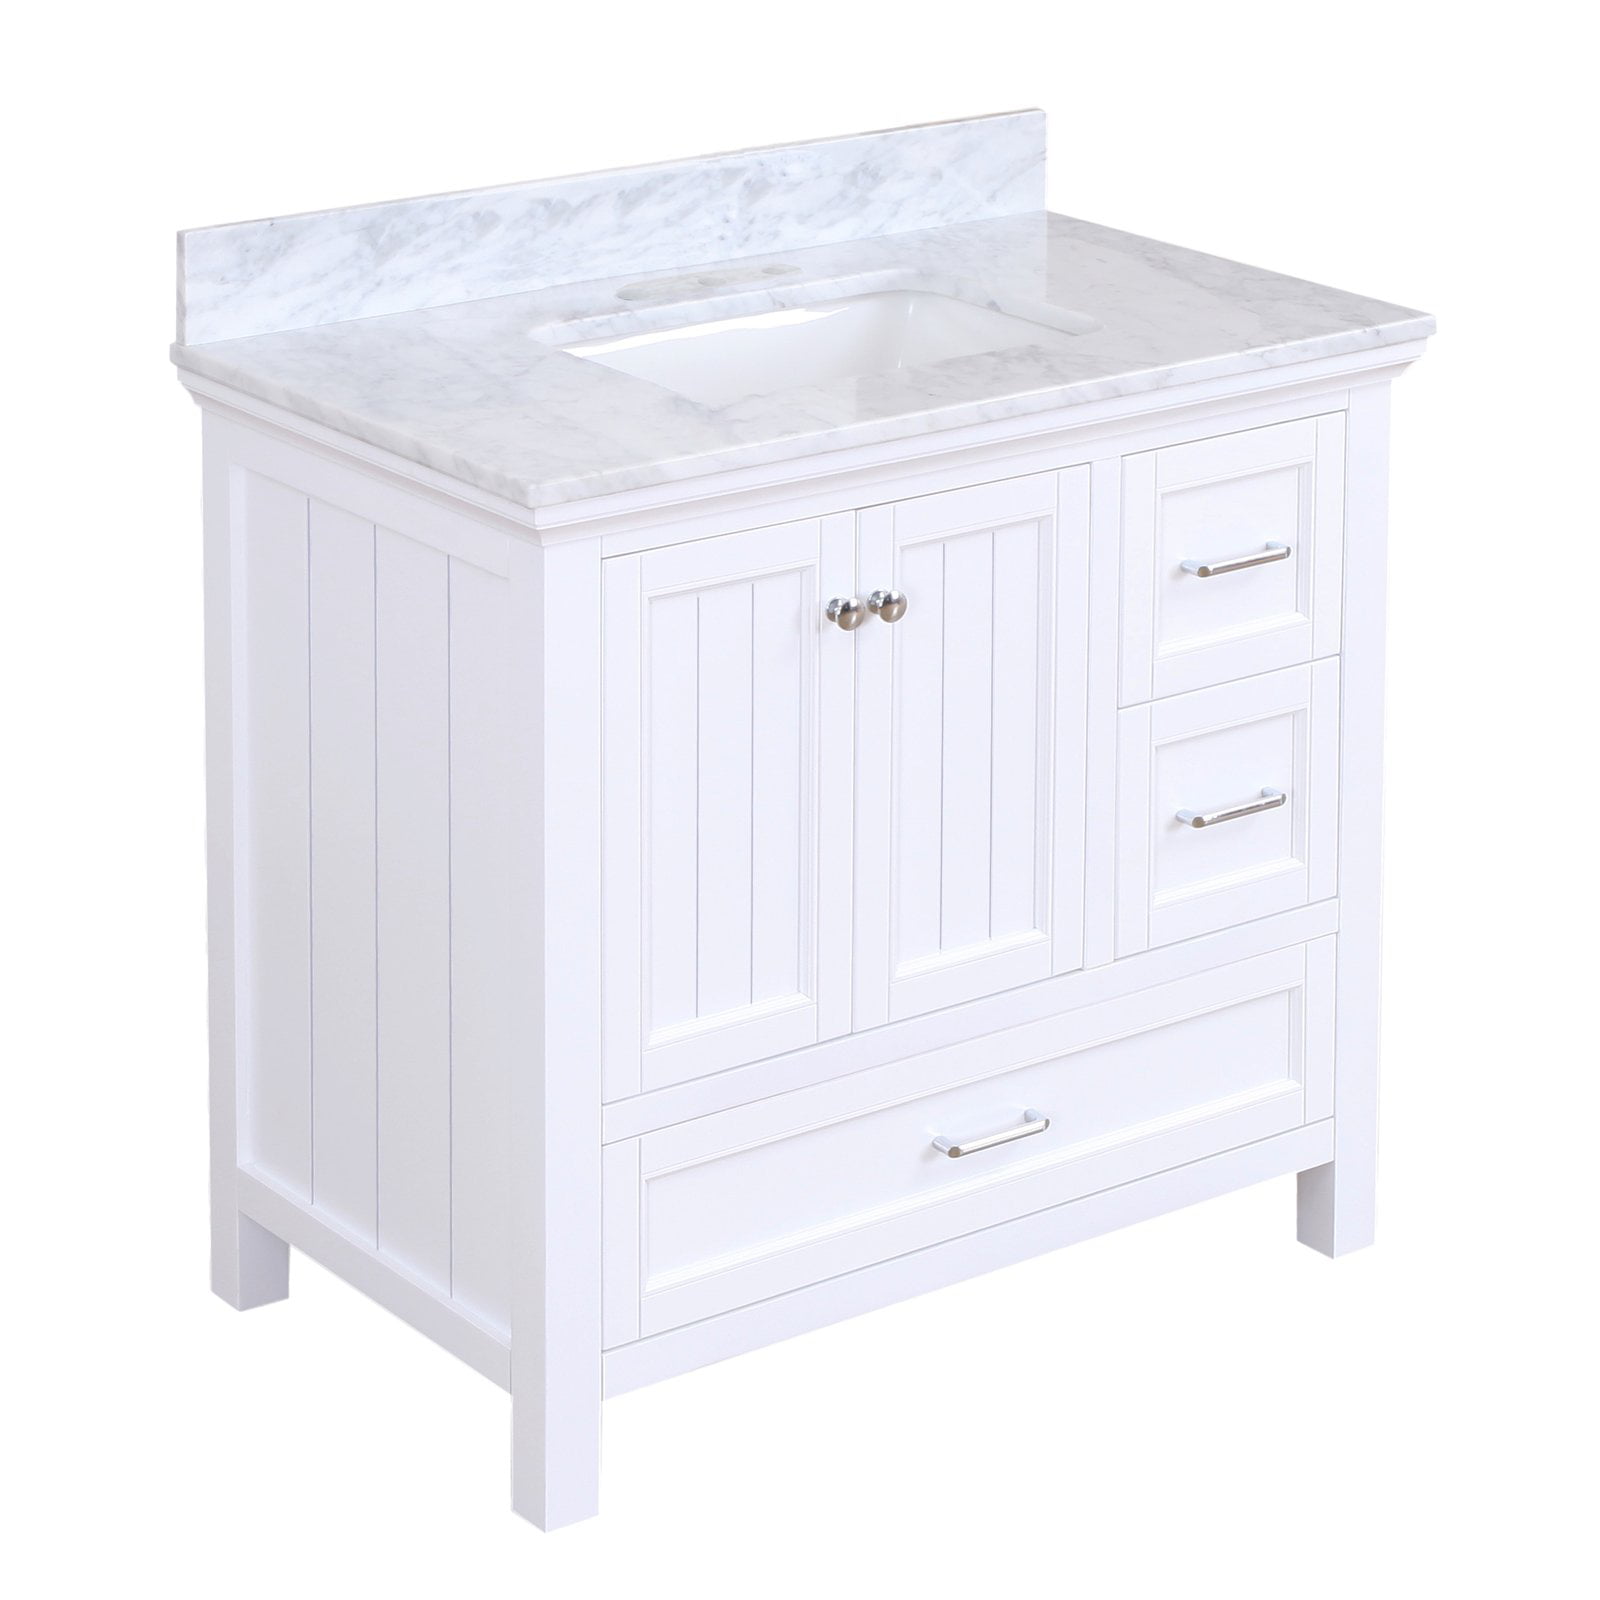 Paige 36 Bathroom Vanity With White, 36 Inch Bath Vanity With Top